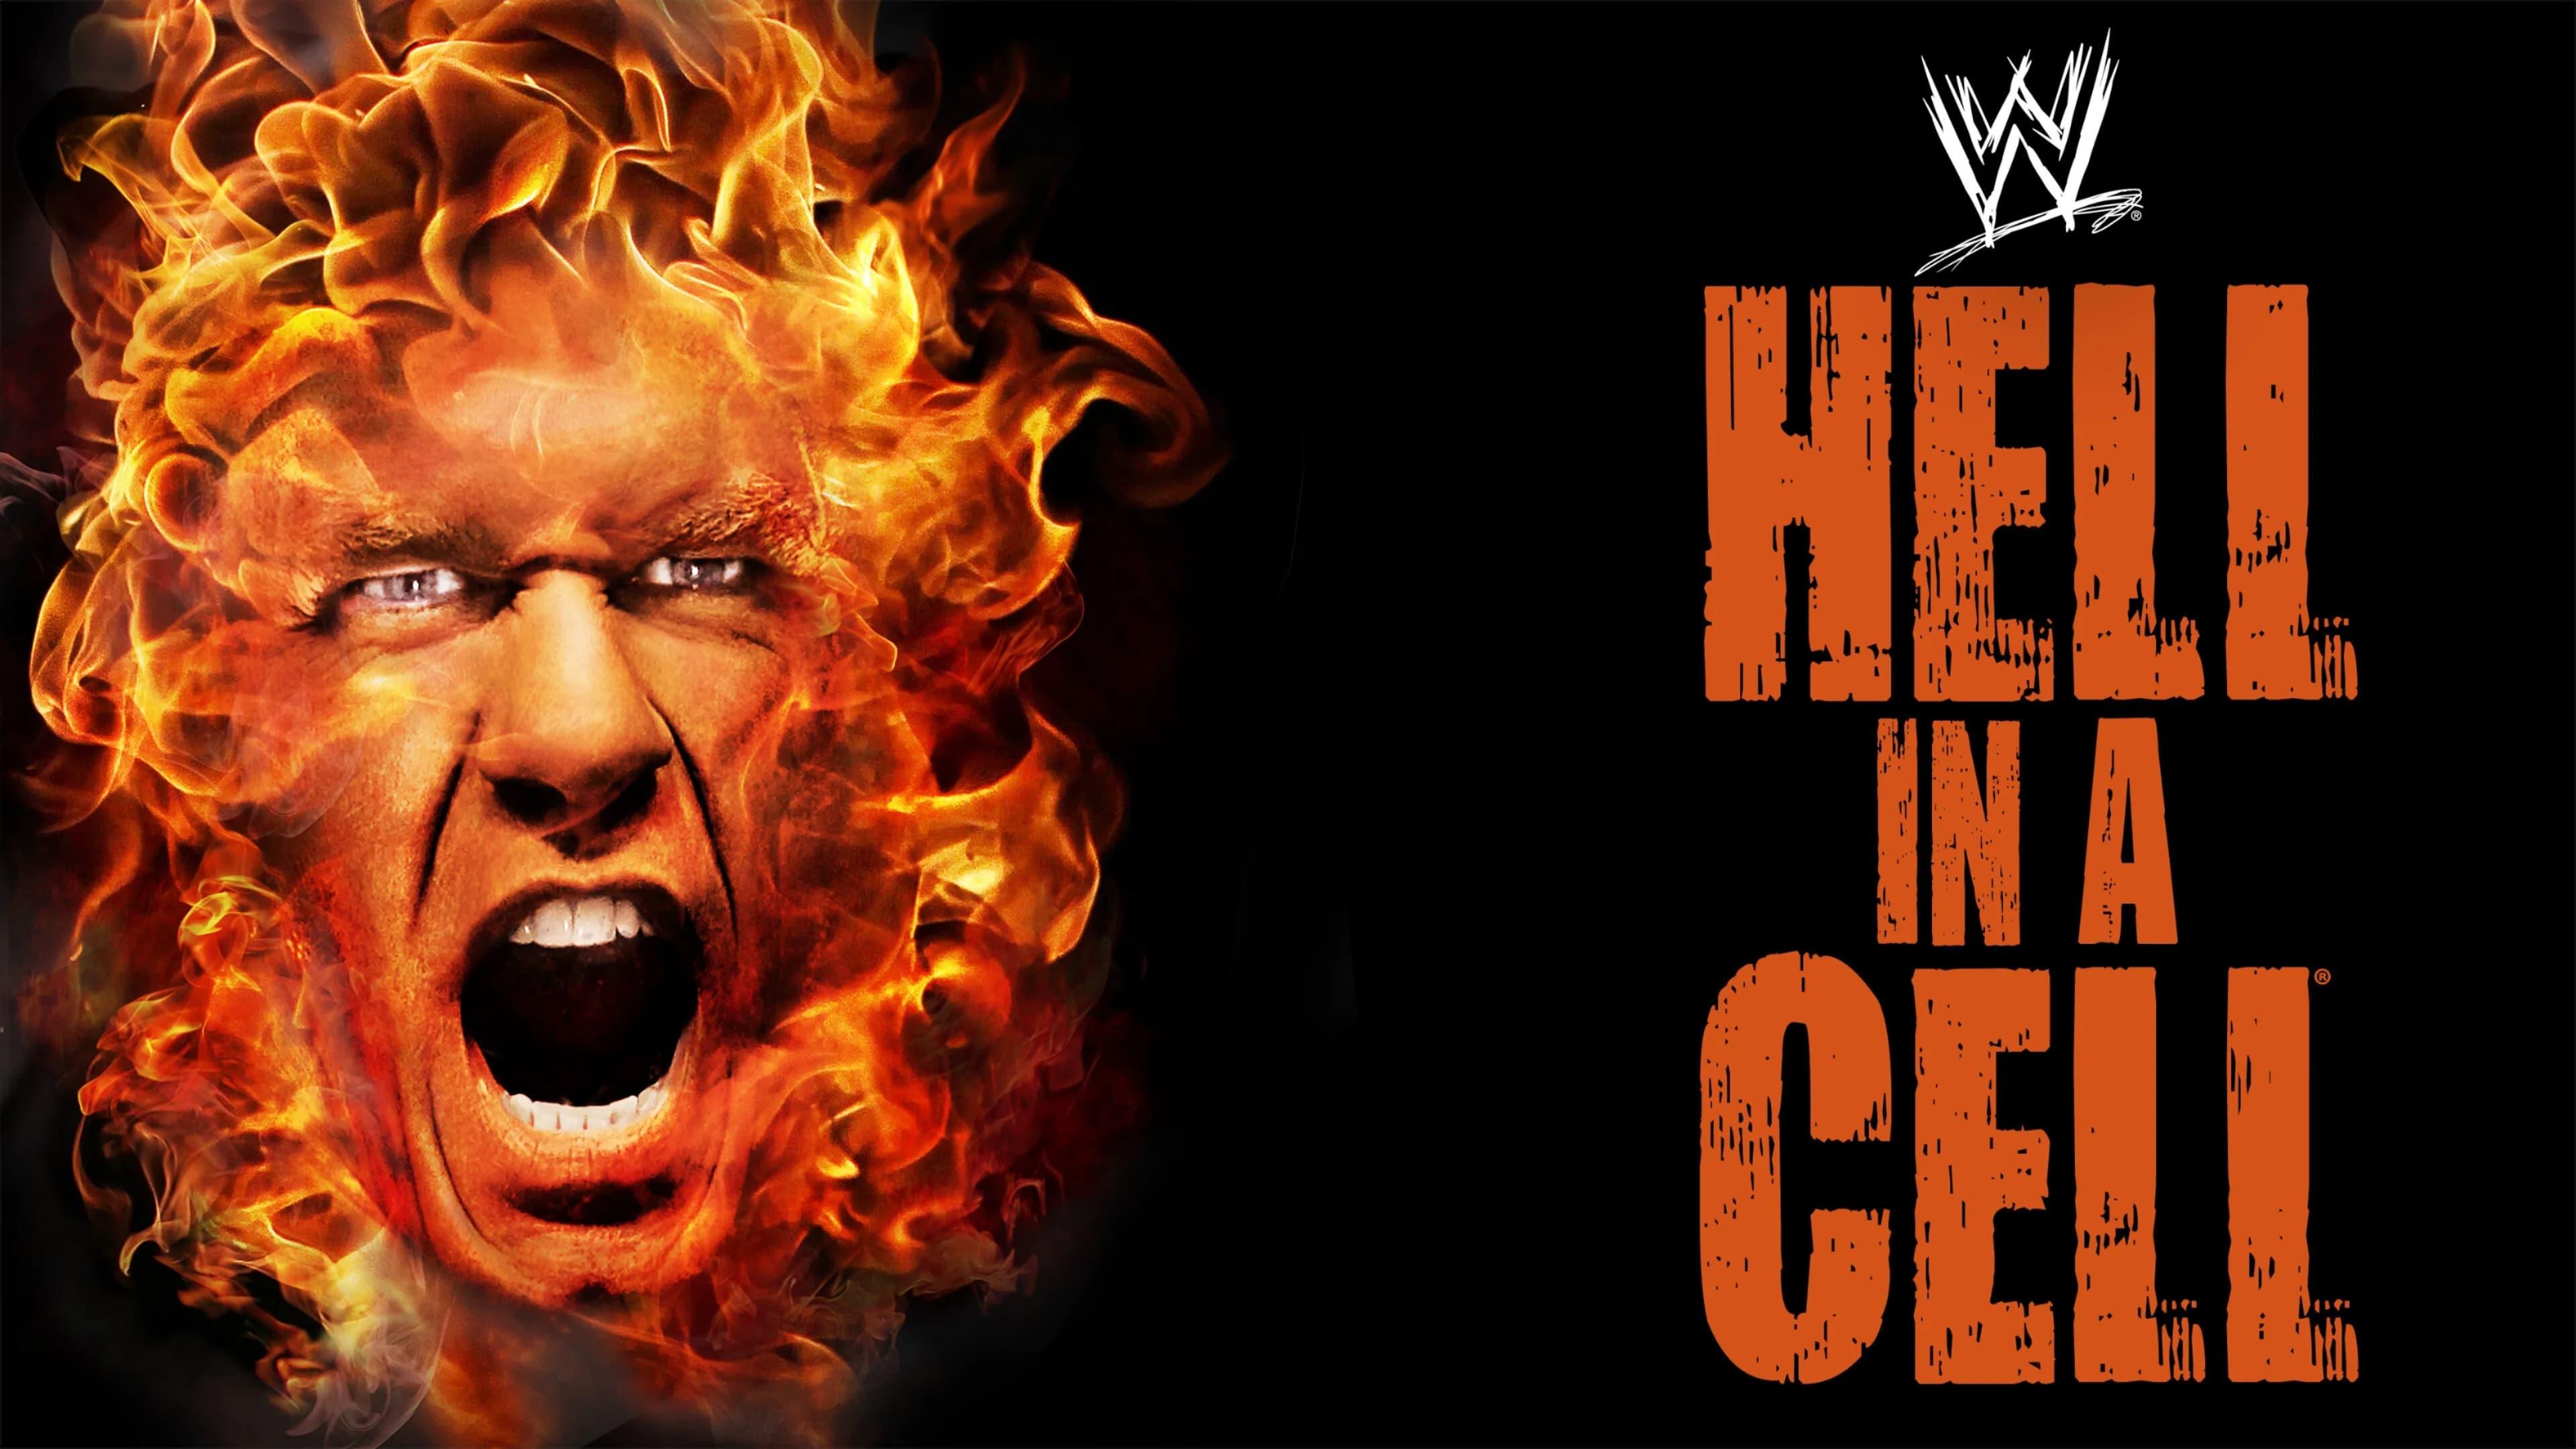 WWE Hell in a Cell 2011 backdrop